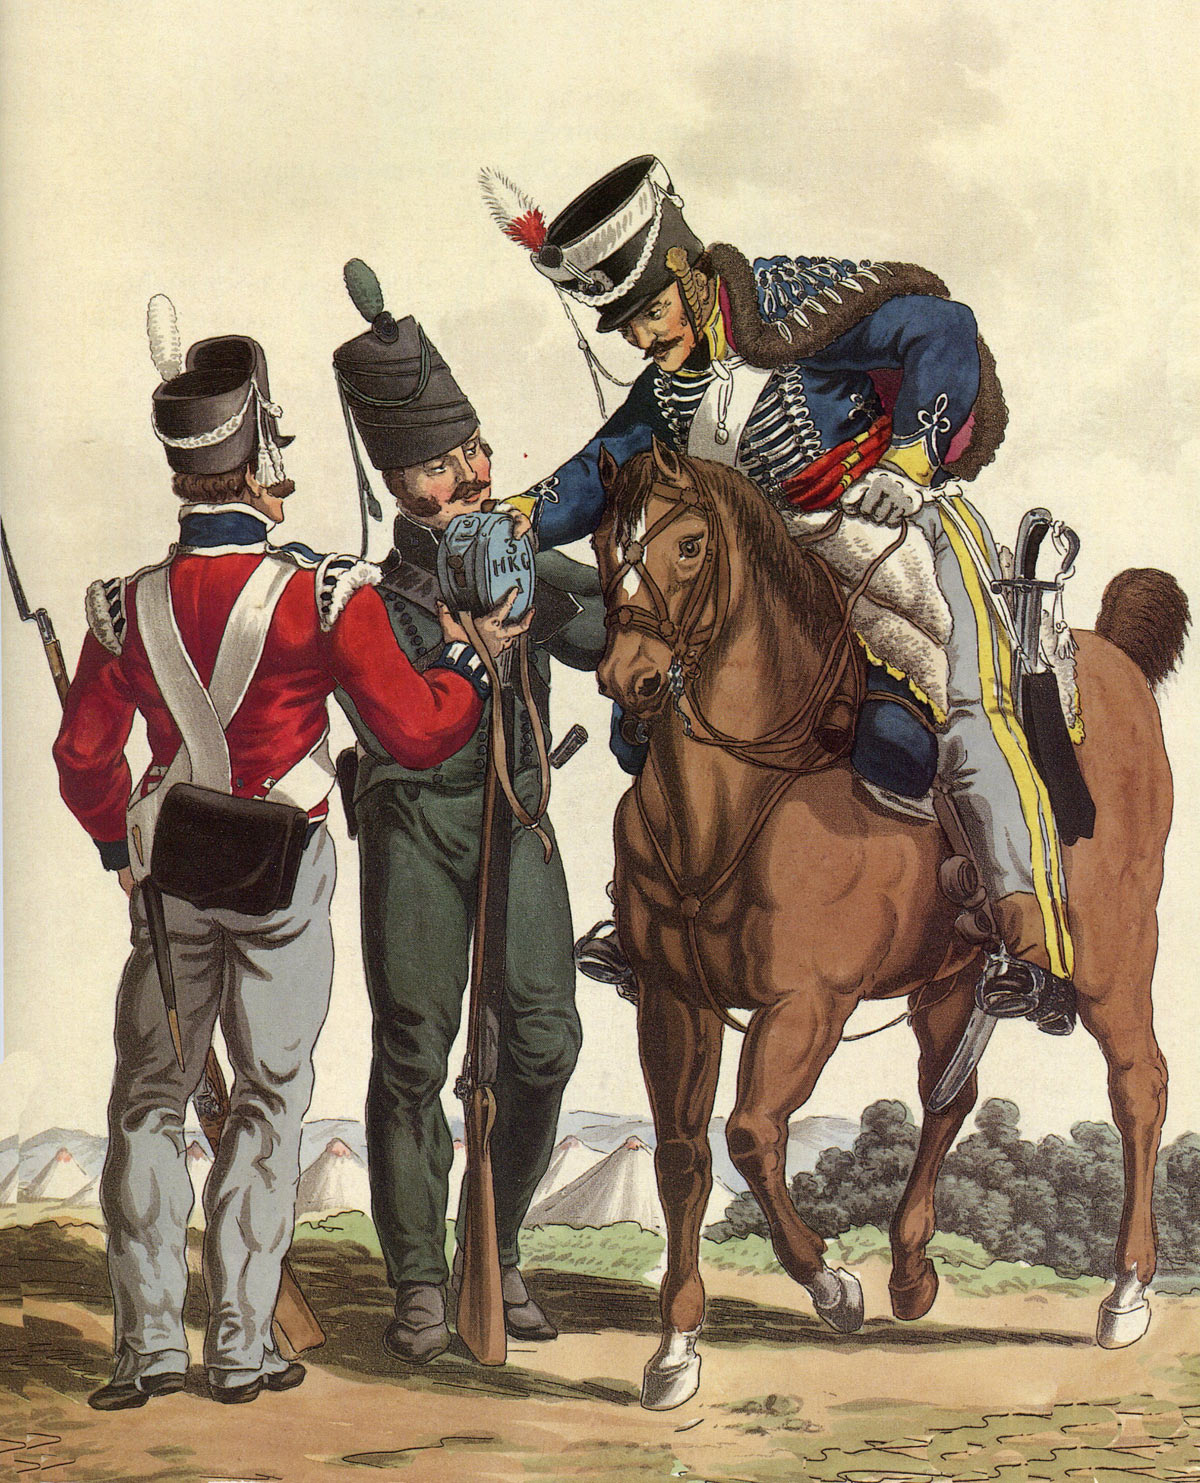 Infantry, Light Infantry and Hussar of the King’s German Legion: Battle of Talavera on 28th July 1809 in the Peninsular War: picture by Charles Hamilton Smith